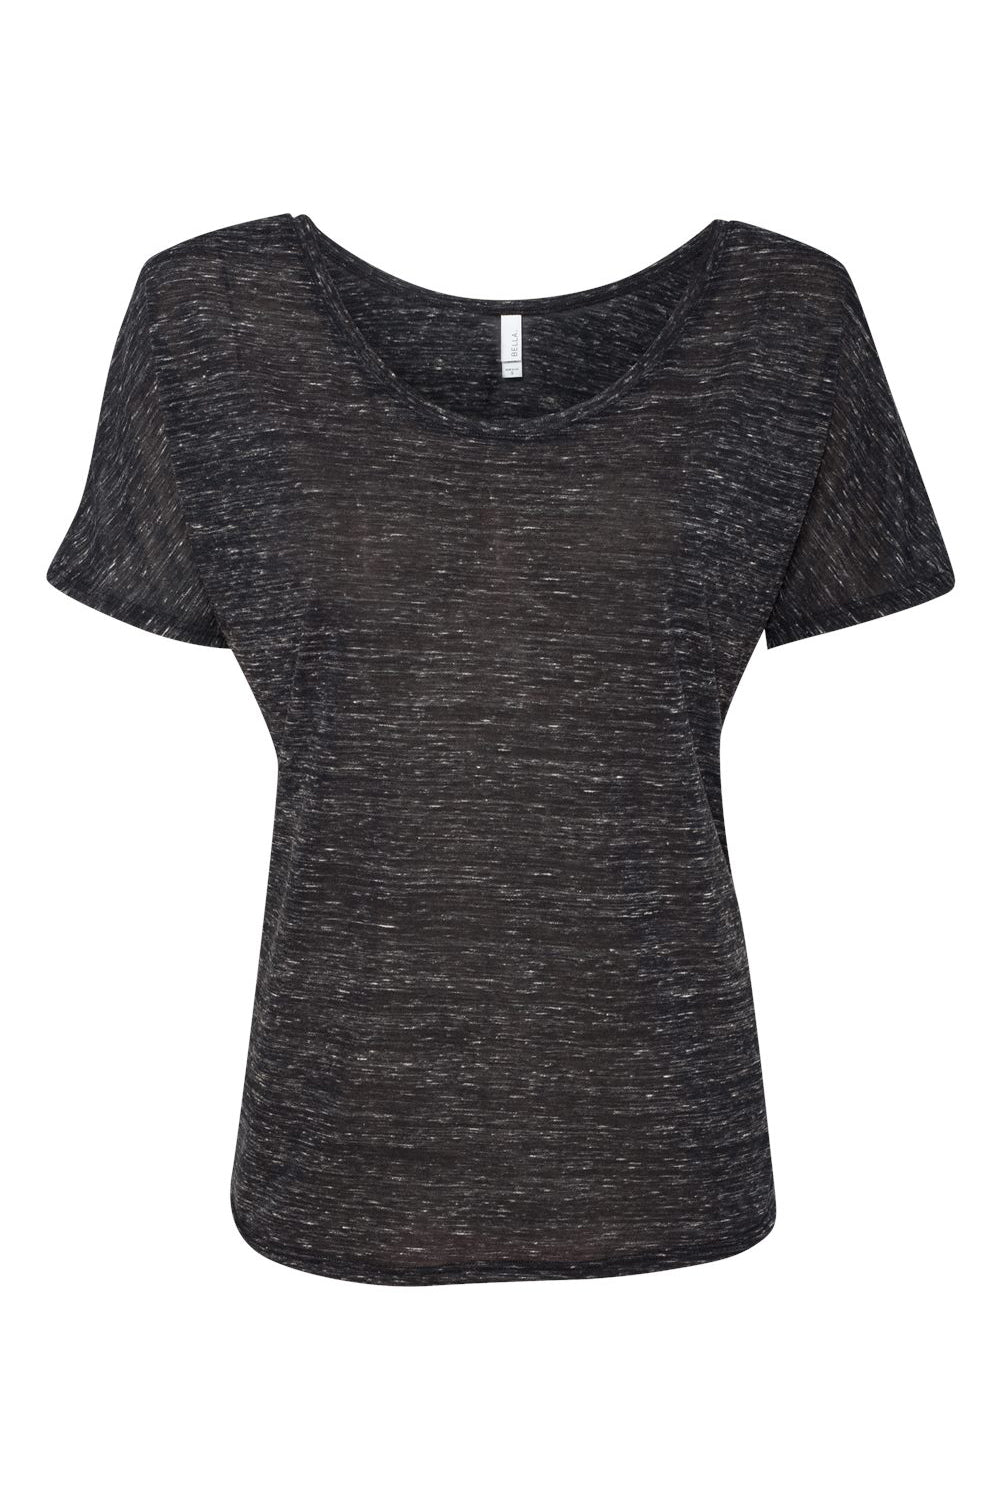 Bella + Canvas BC8816/8816 Womens Slouchy Short Sleeve Wide Neck T-Shirt Black Marble Flat Front